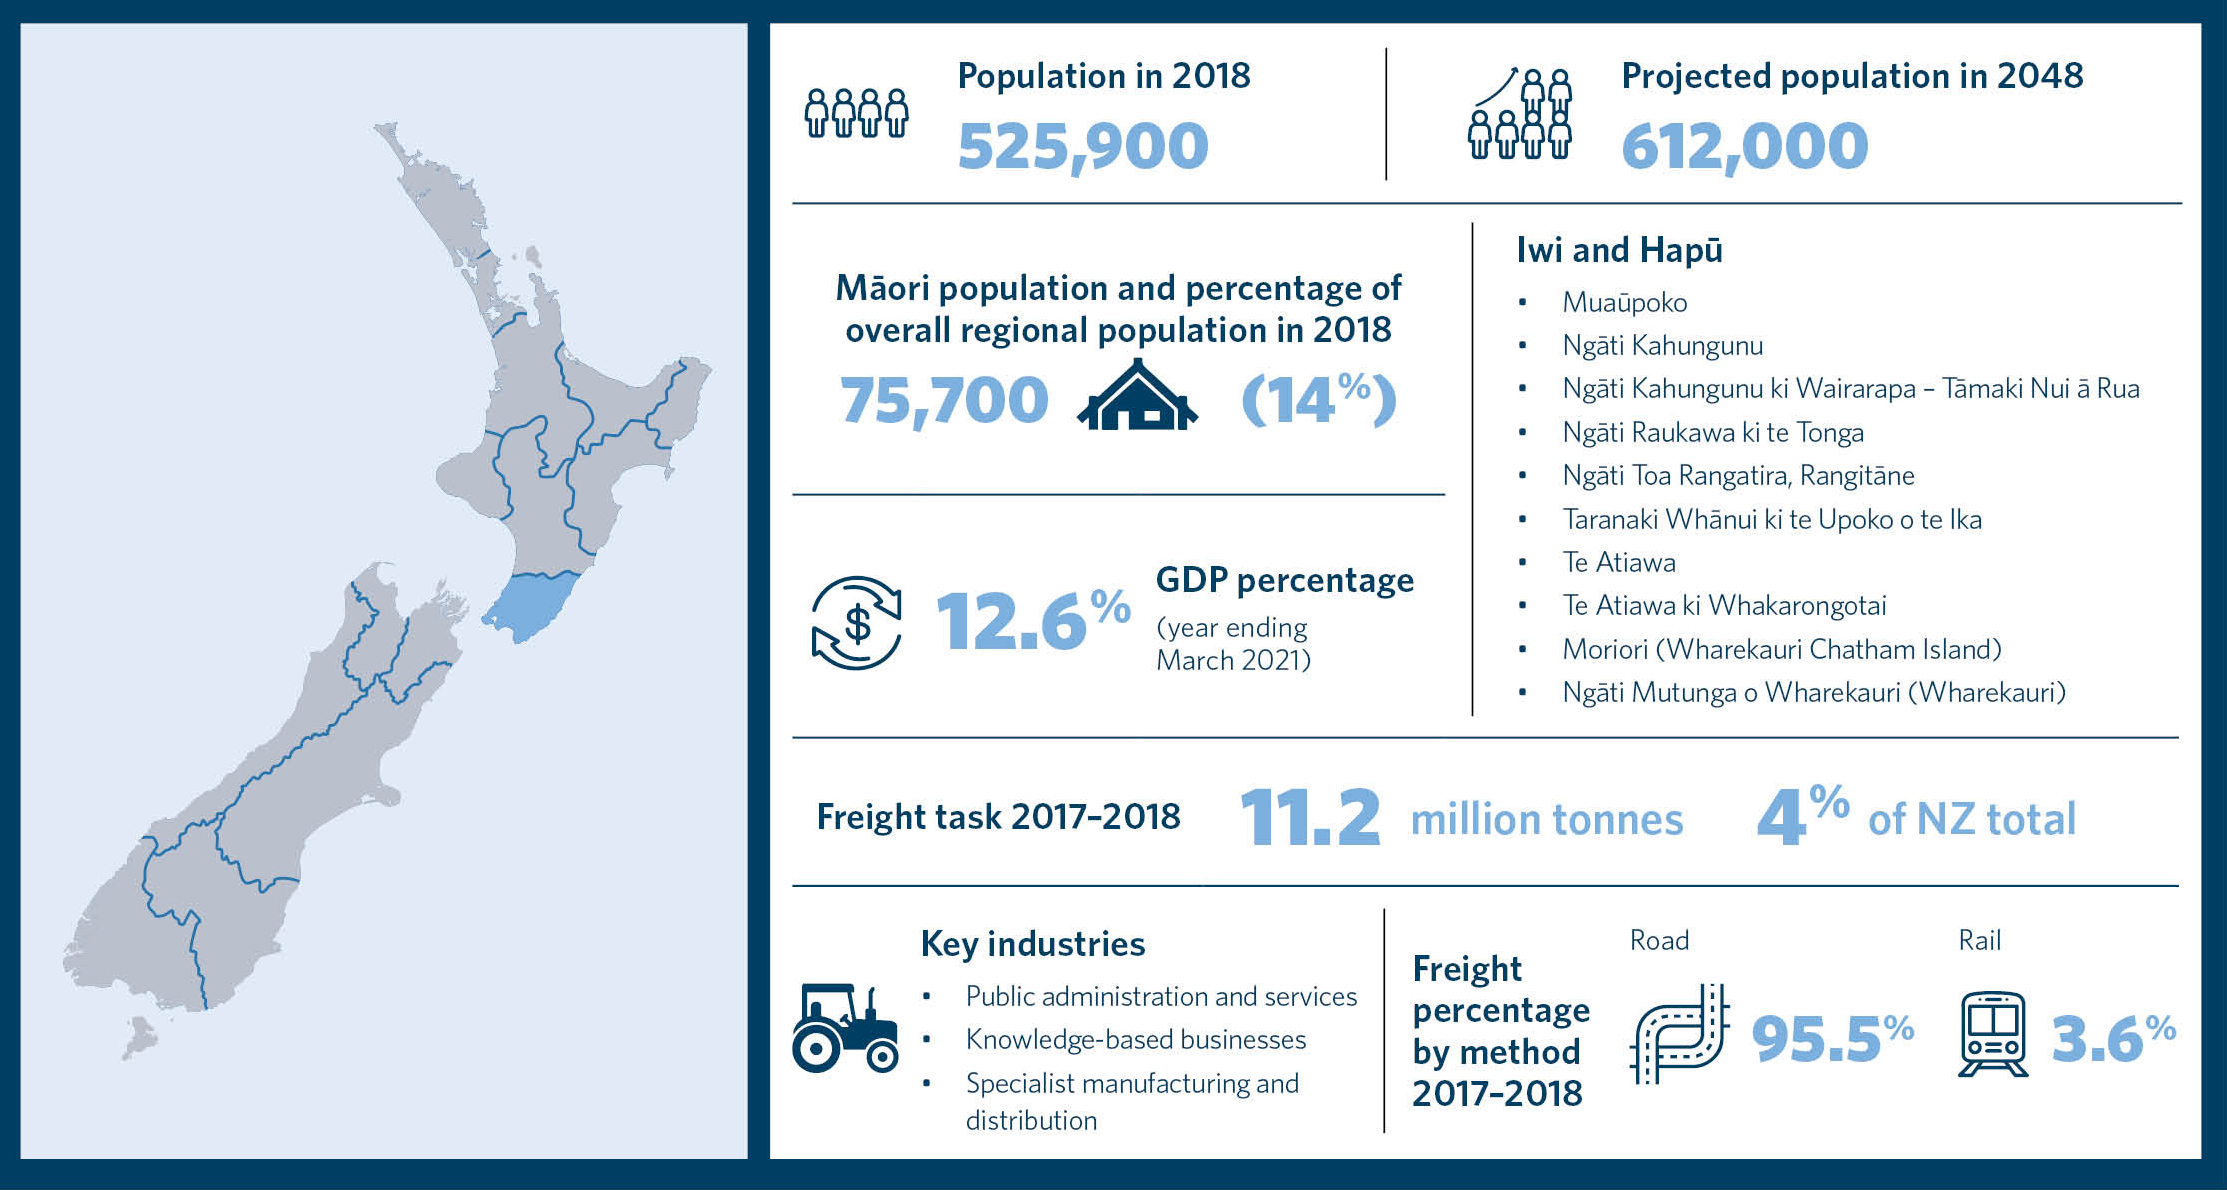 This is an infographic showing statistics for the region of Te Upoko o te Ika a Māui Greater Wellington. It includes information about the population in 2018, projected population in 2048, Māori population and percentage of overall regional population in 